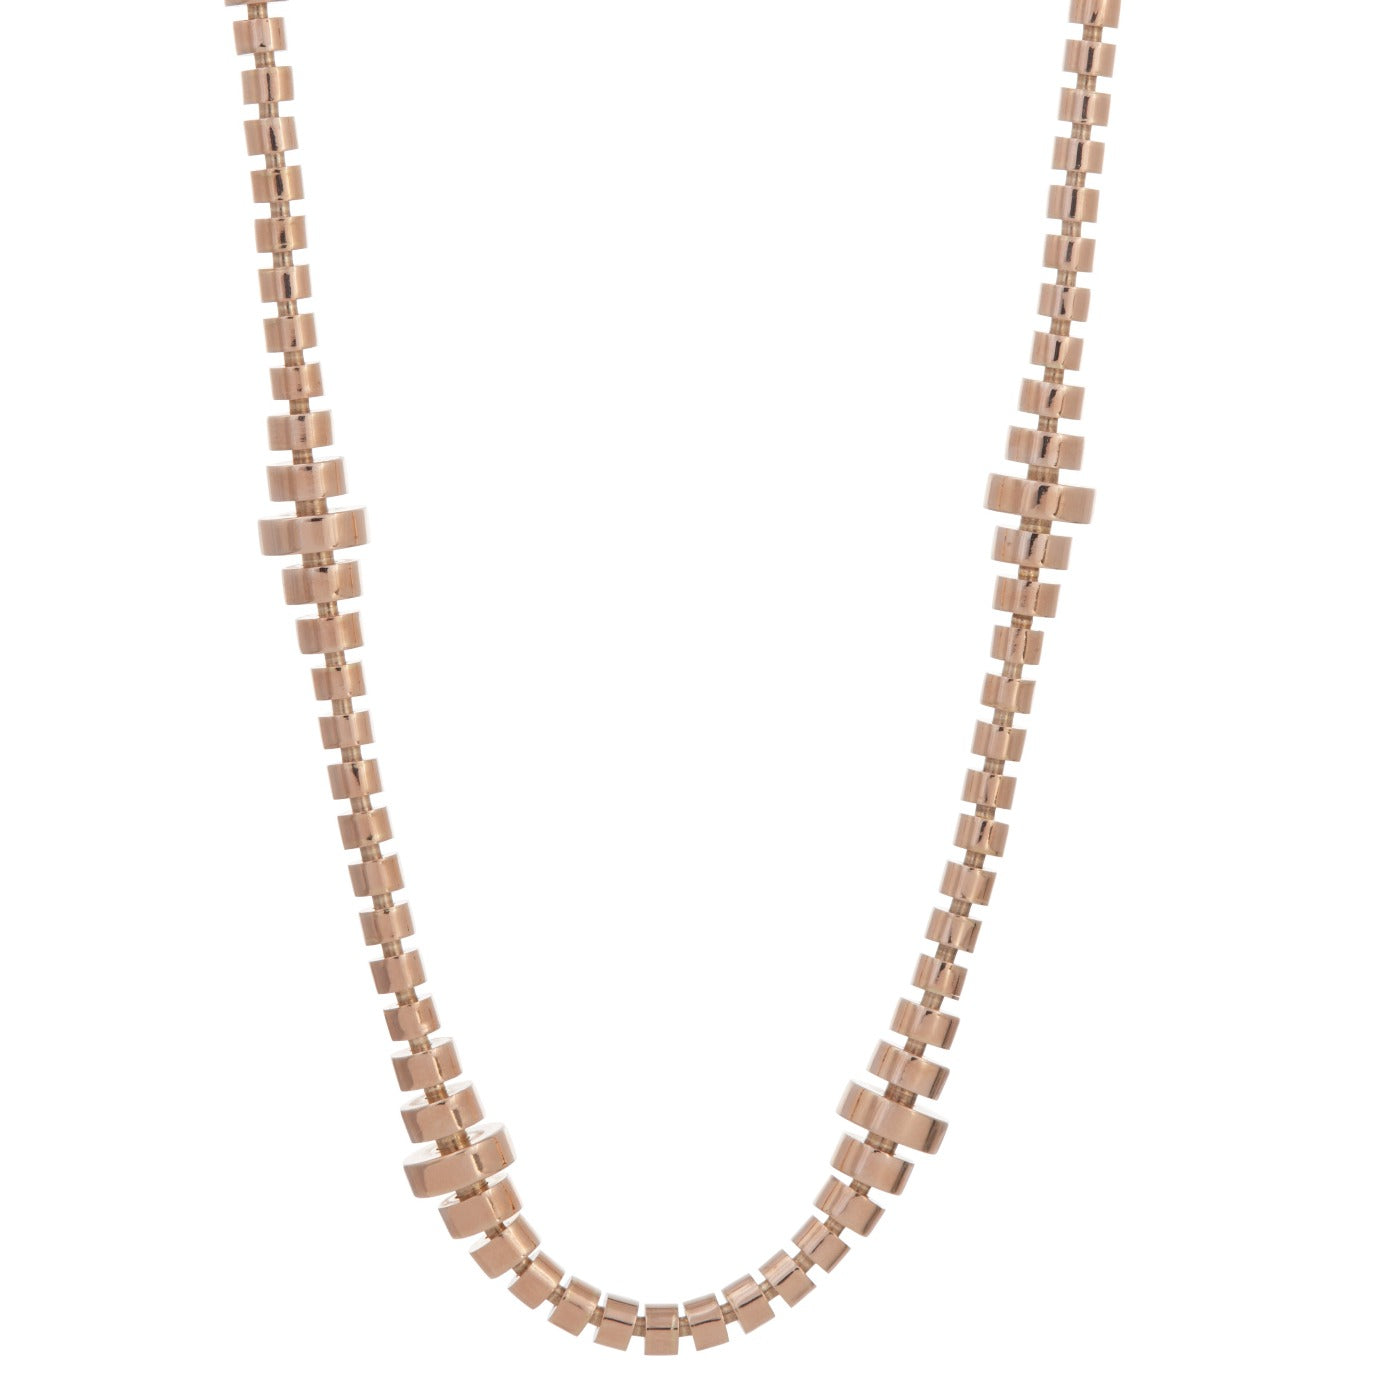 Hourglass necklace in 18k rose gold 